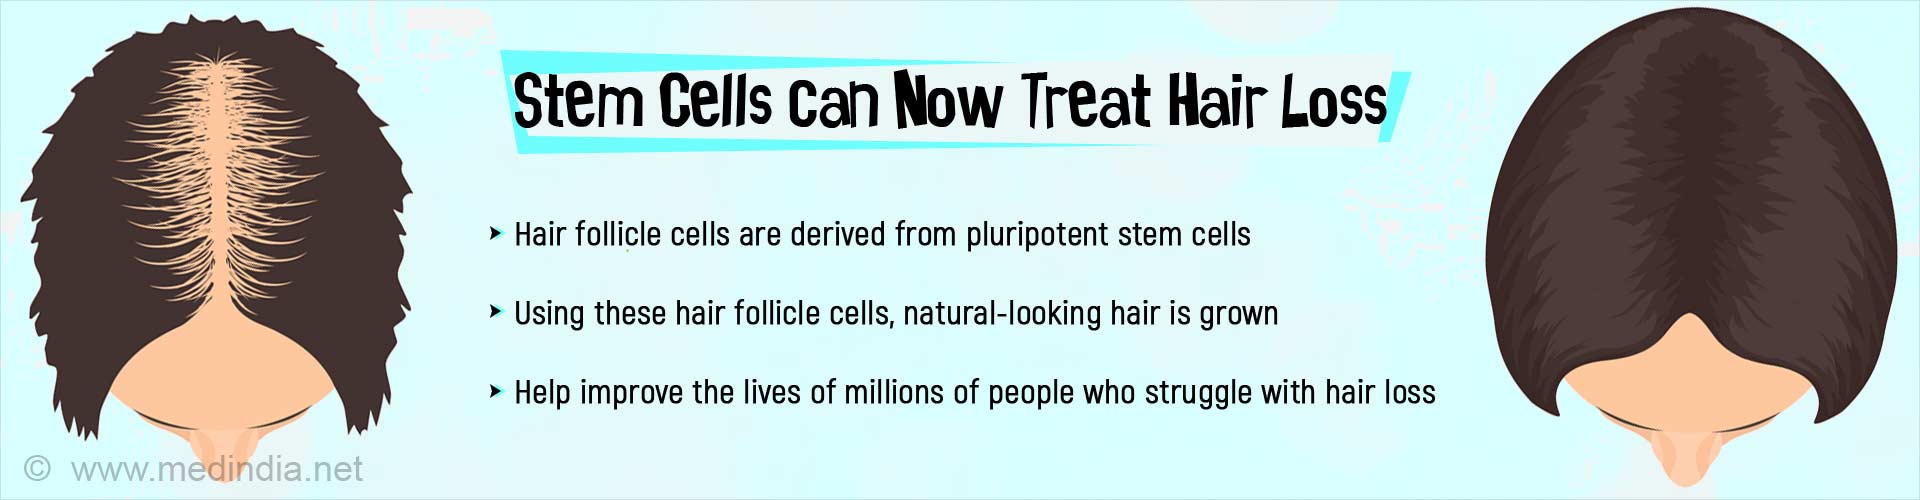 Stem cells can now treat hair loss. Hair follicle cells are derived from pluripotent stem cells. Using these hair follicle cells, natural-looking hair is grown. Helps improve the lives of millions of people who struggle with hair loss.